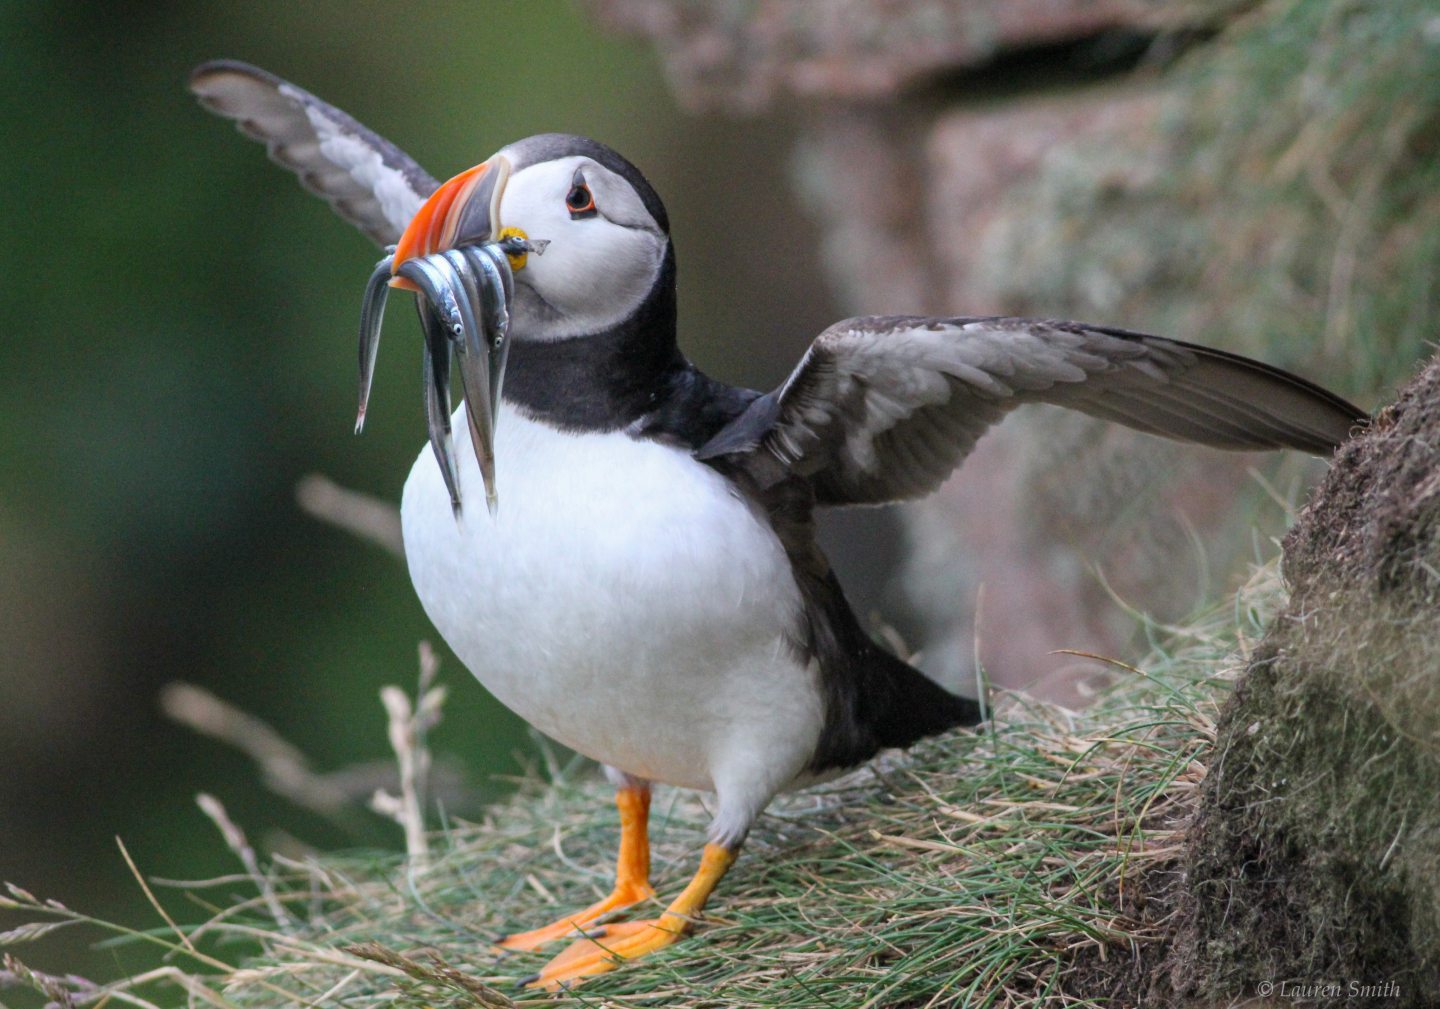 A proud puffin with his catch of sand eels at Bullers of Buchan.